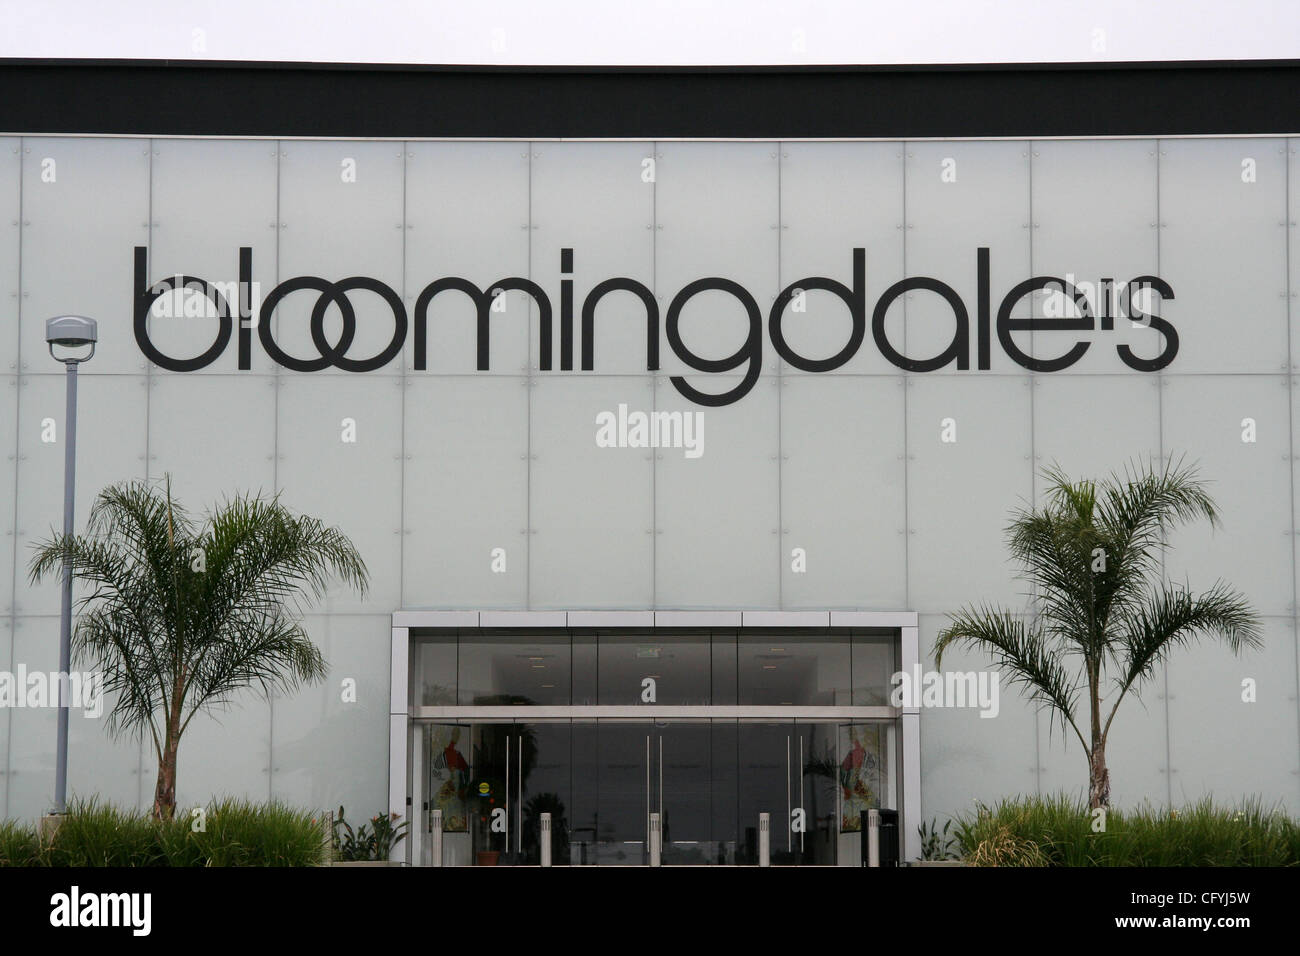 May 20, 2007 - Costa Mesa, CA, USA - Bloomingdale's is a chain of upscale  American department stores owned by Federated Department Stores, which is  also the parent company of Macy's. Bloomingdale's